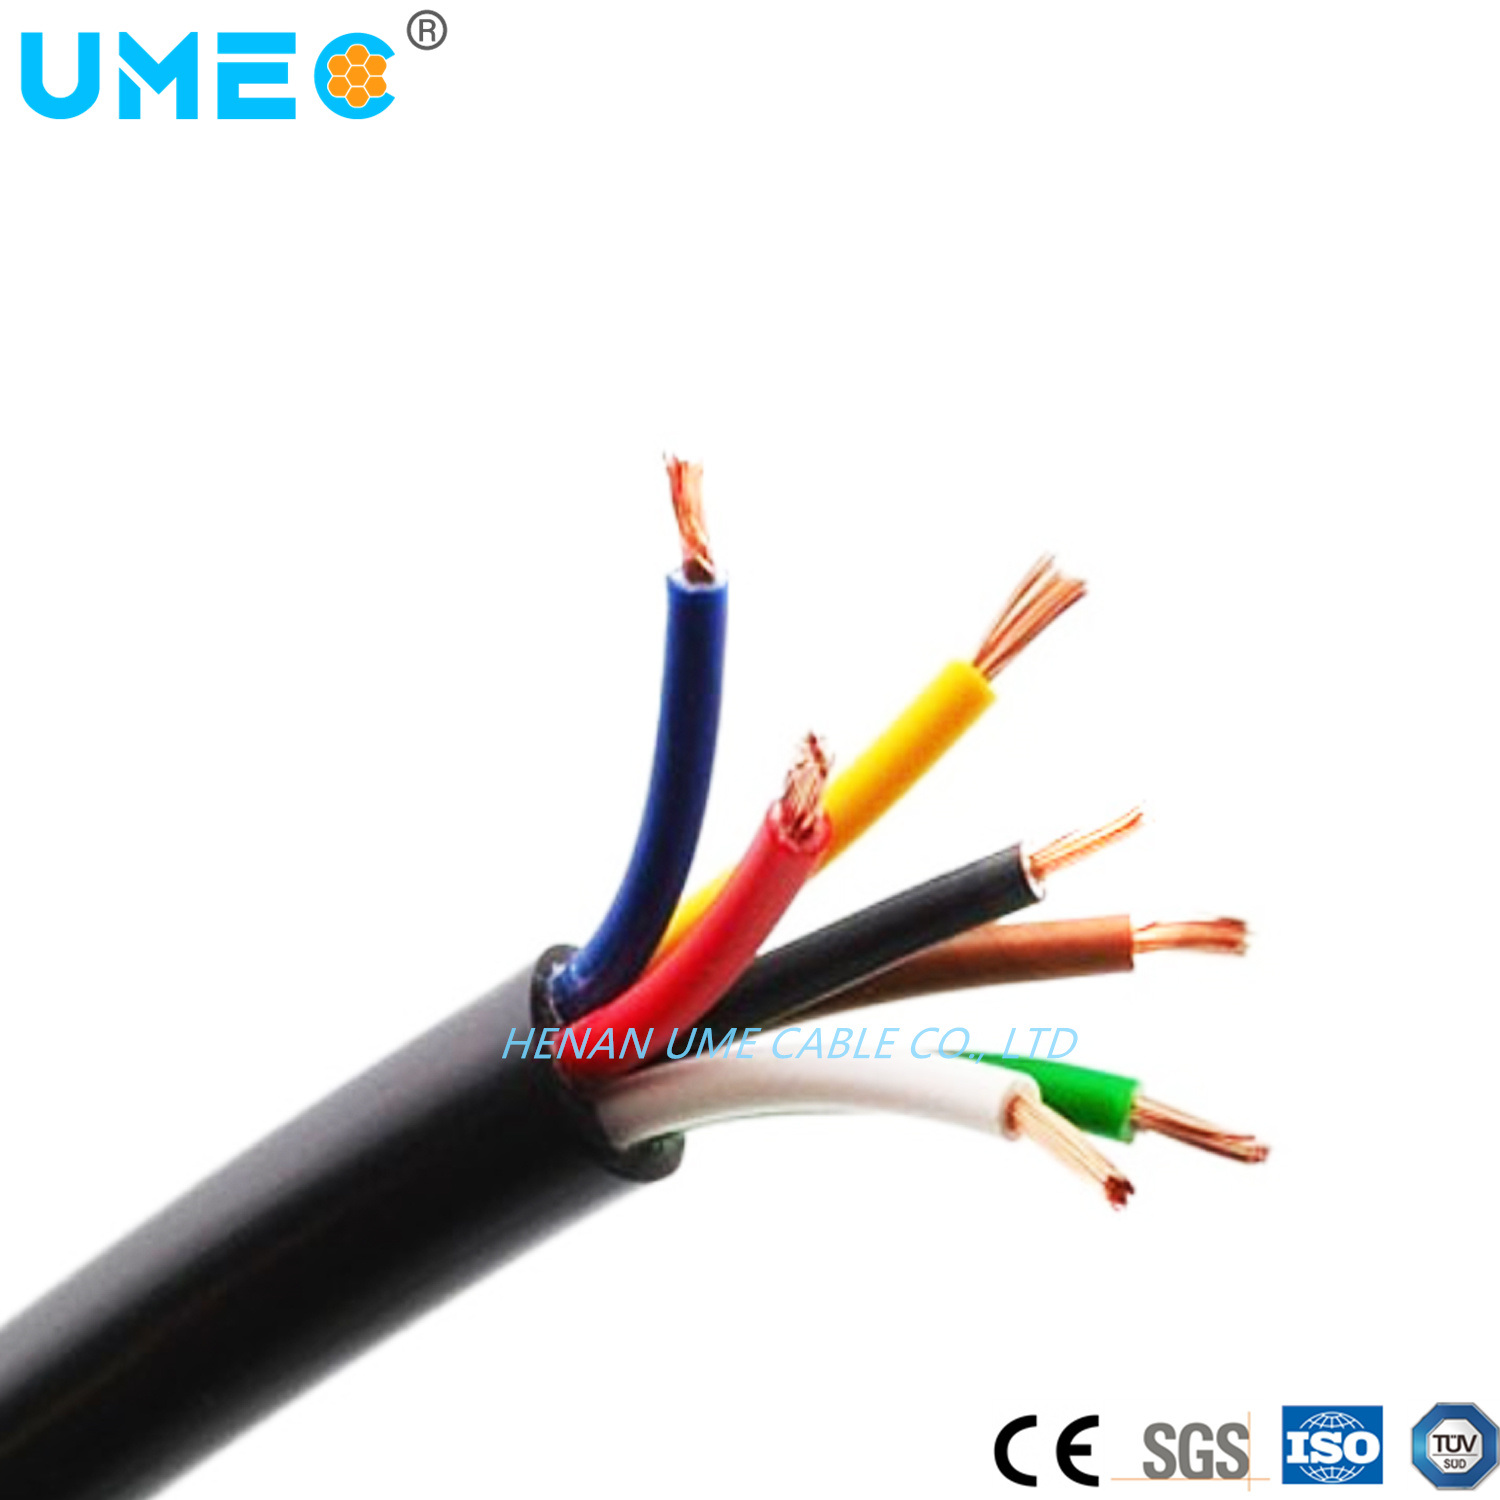 300/600V 2 3 4 5 6 7 8 Core 1.5mm2 2.5mm2 4mm2 6mm2 8mm2 10mm2 16mm2 25mm2 H07rn-F So Stow Stoow Sjoow Soow Rubber Flexible Cable